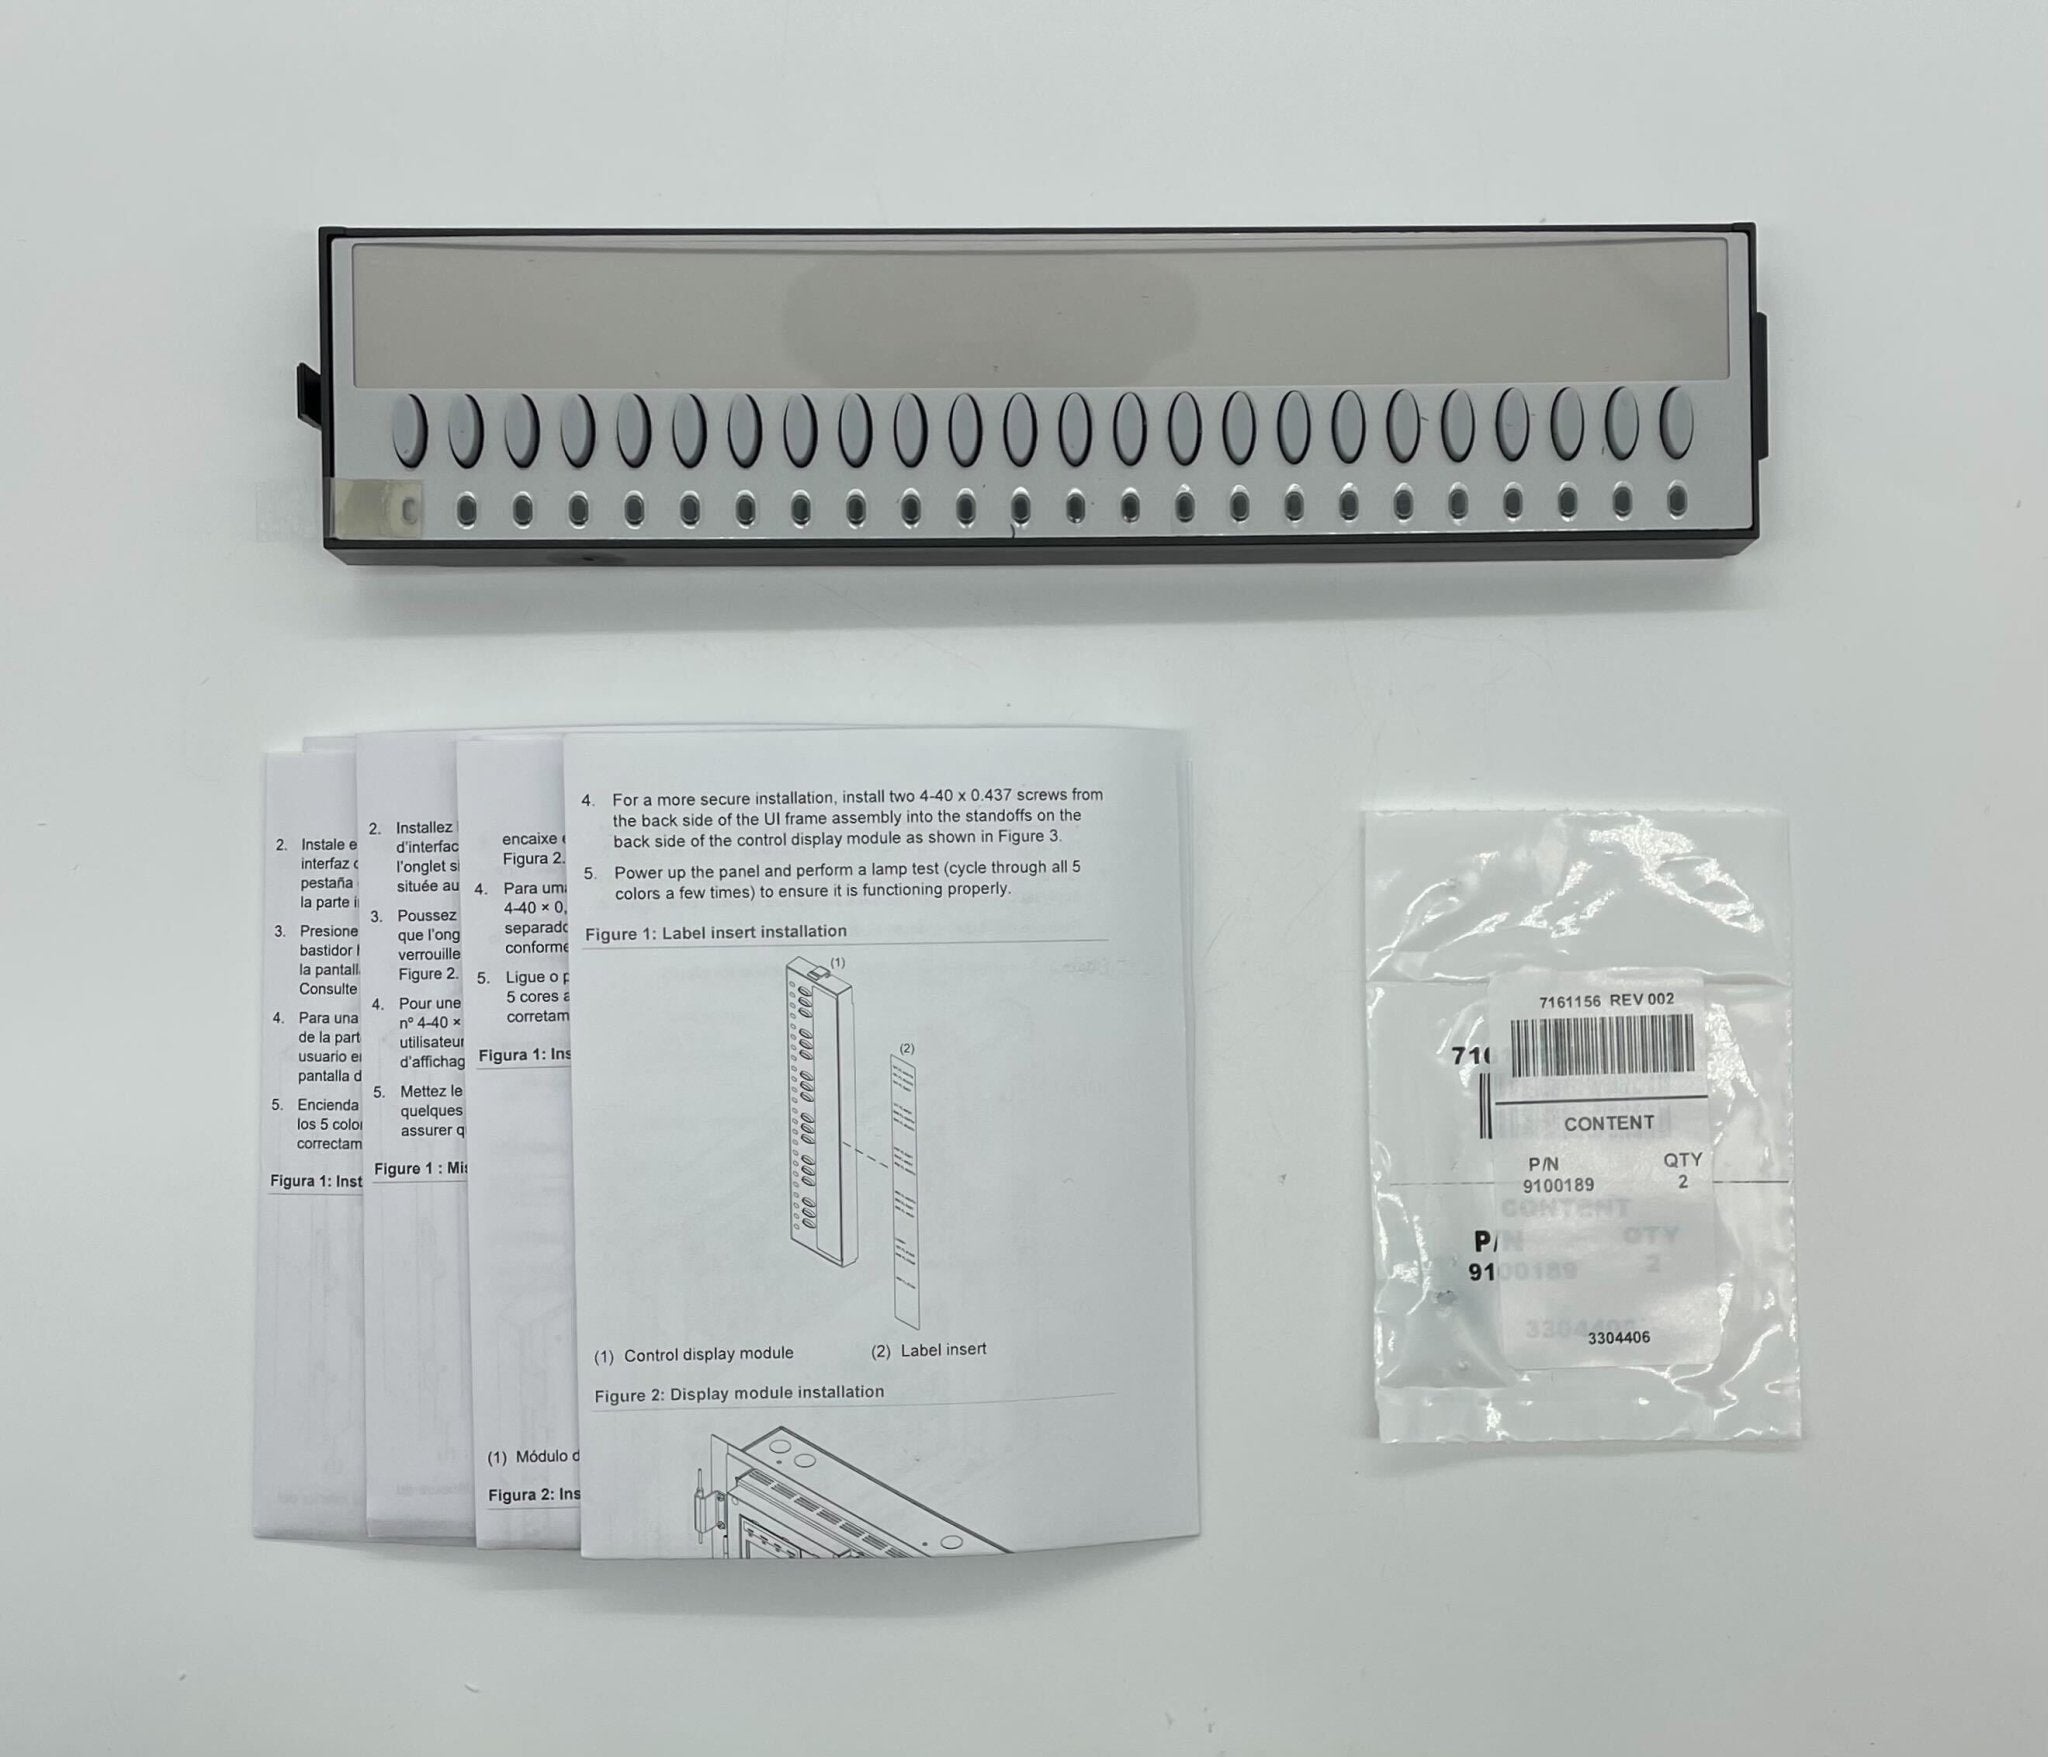 Edwards 4-24L24S - The Fire Alarm Supplier